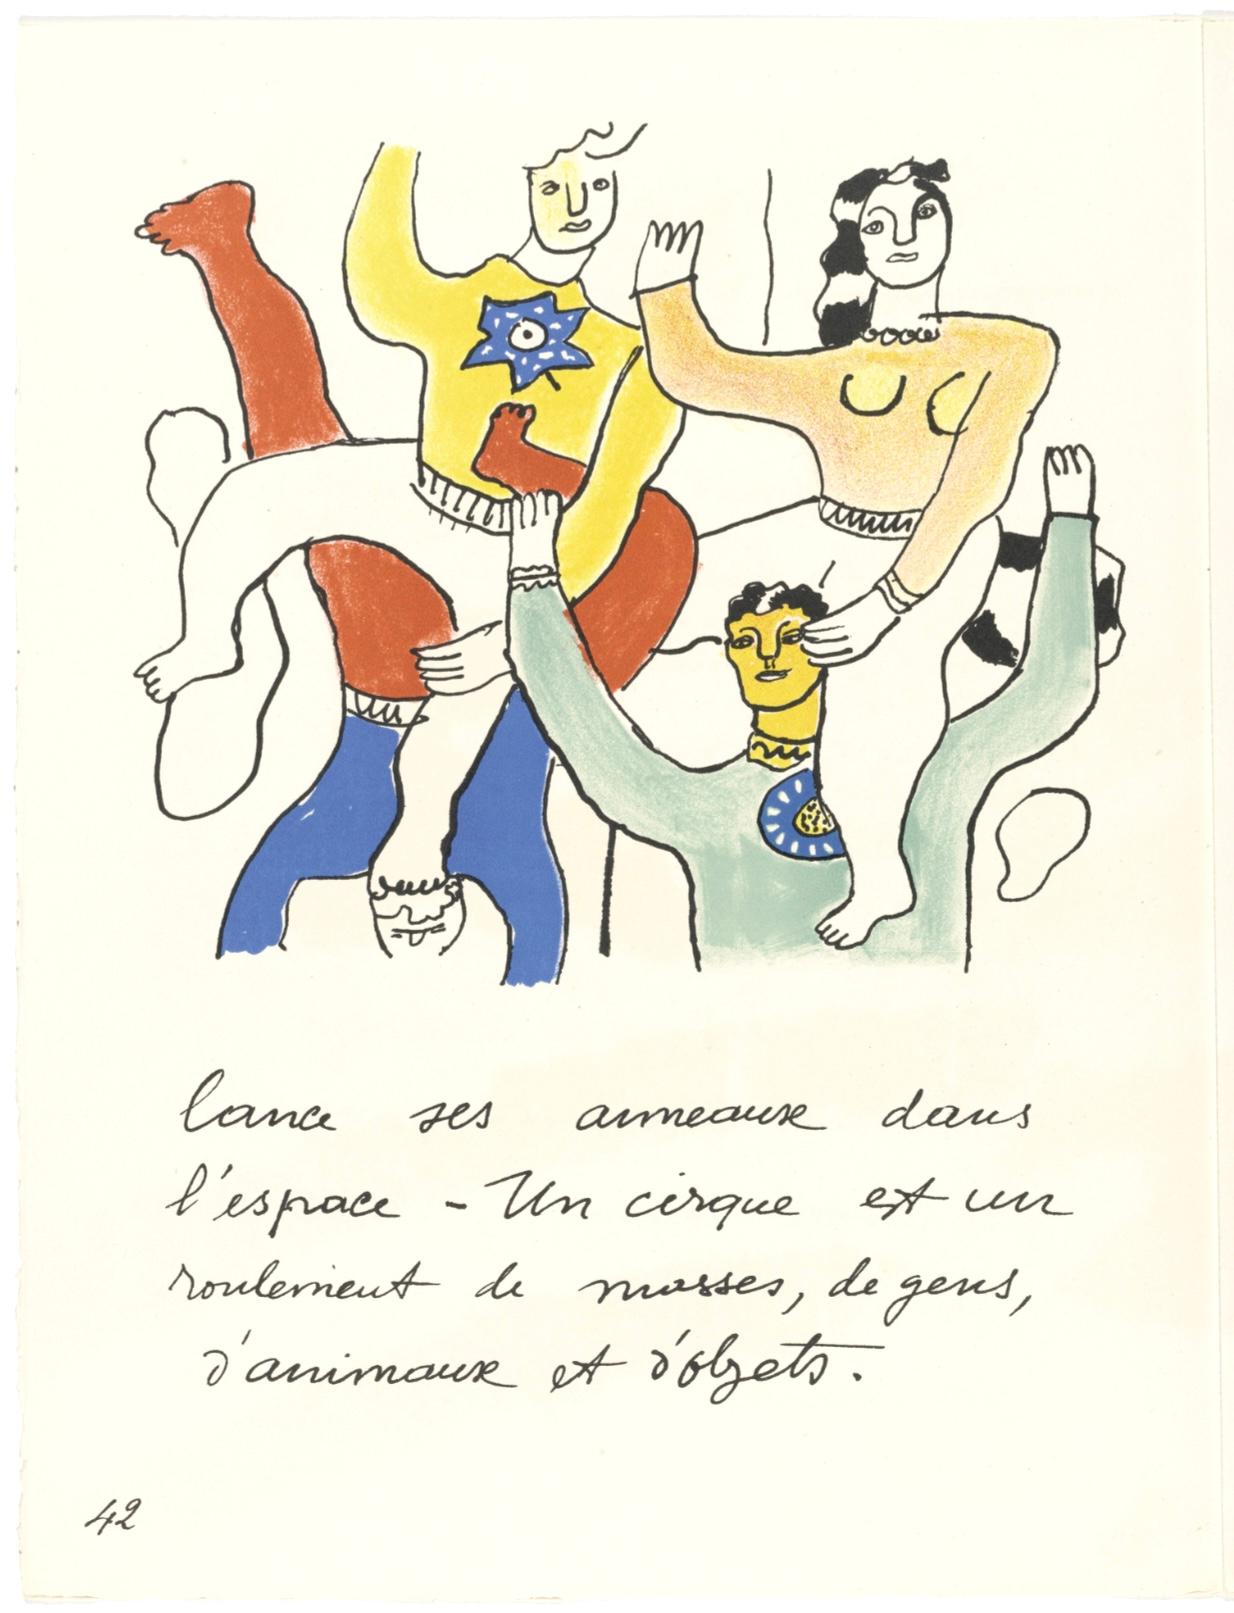 Original Limited Edition Lithograph on Arches paper. Edition: 300. Inscription: Unsigned and unnumbered, as issued. Excellent condition. Notes: From the volume, Cirque, Lithographies originales. Published by Tériade Editeur, Les Éditions Verve,